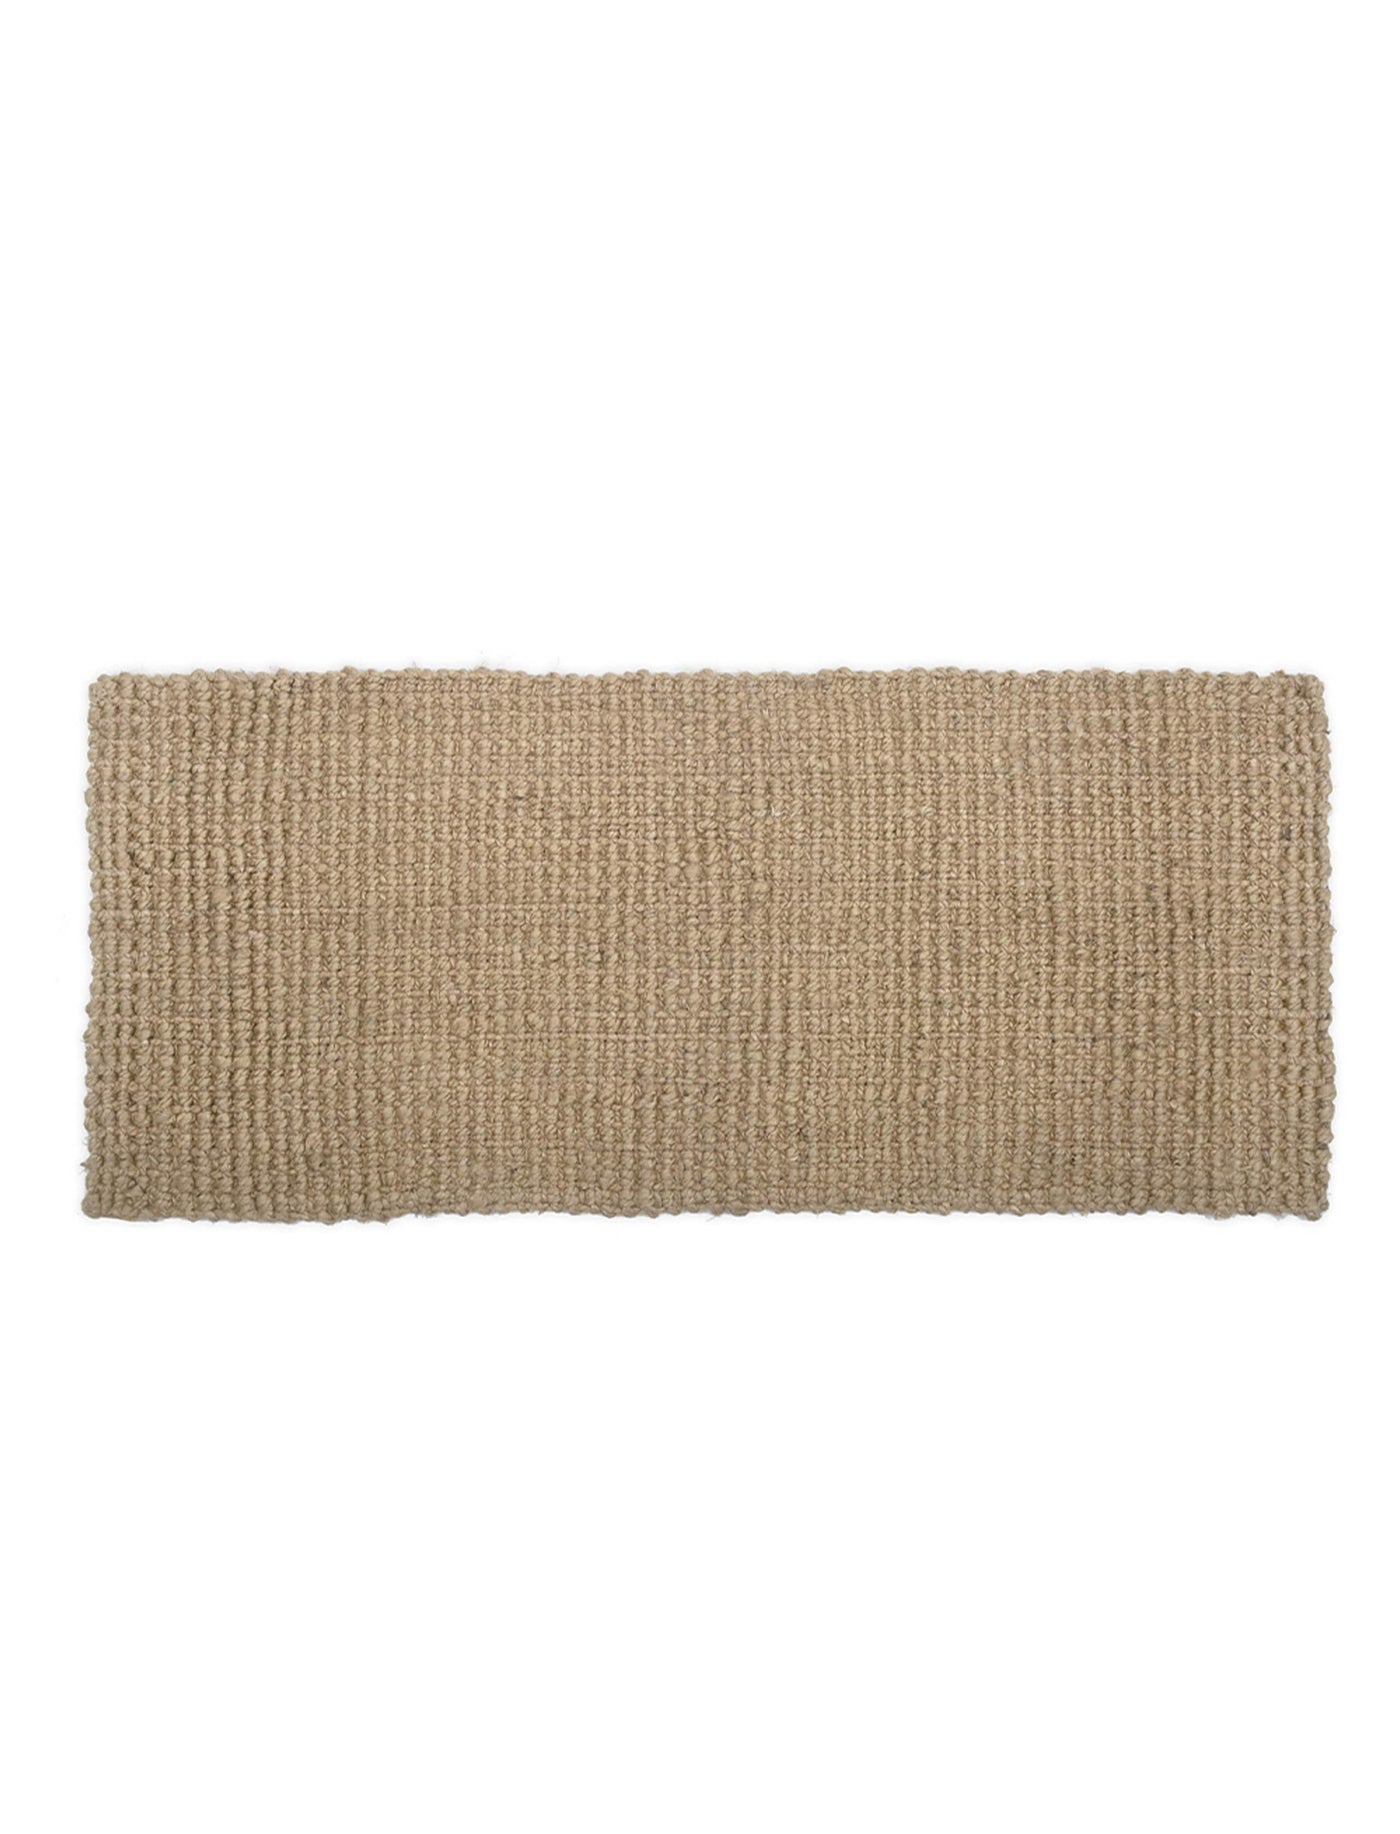 Garden Trading Outdoors Woven Double Doormat - Natural House of Isabella UK